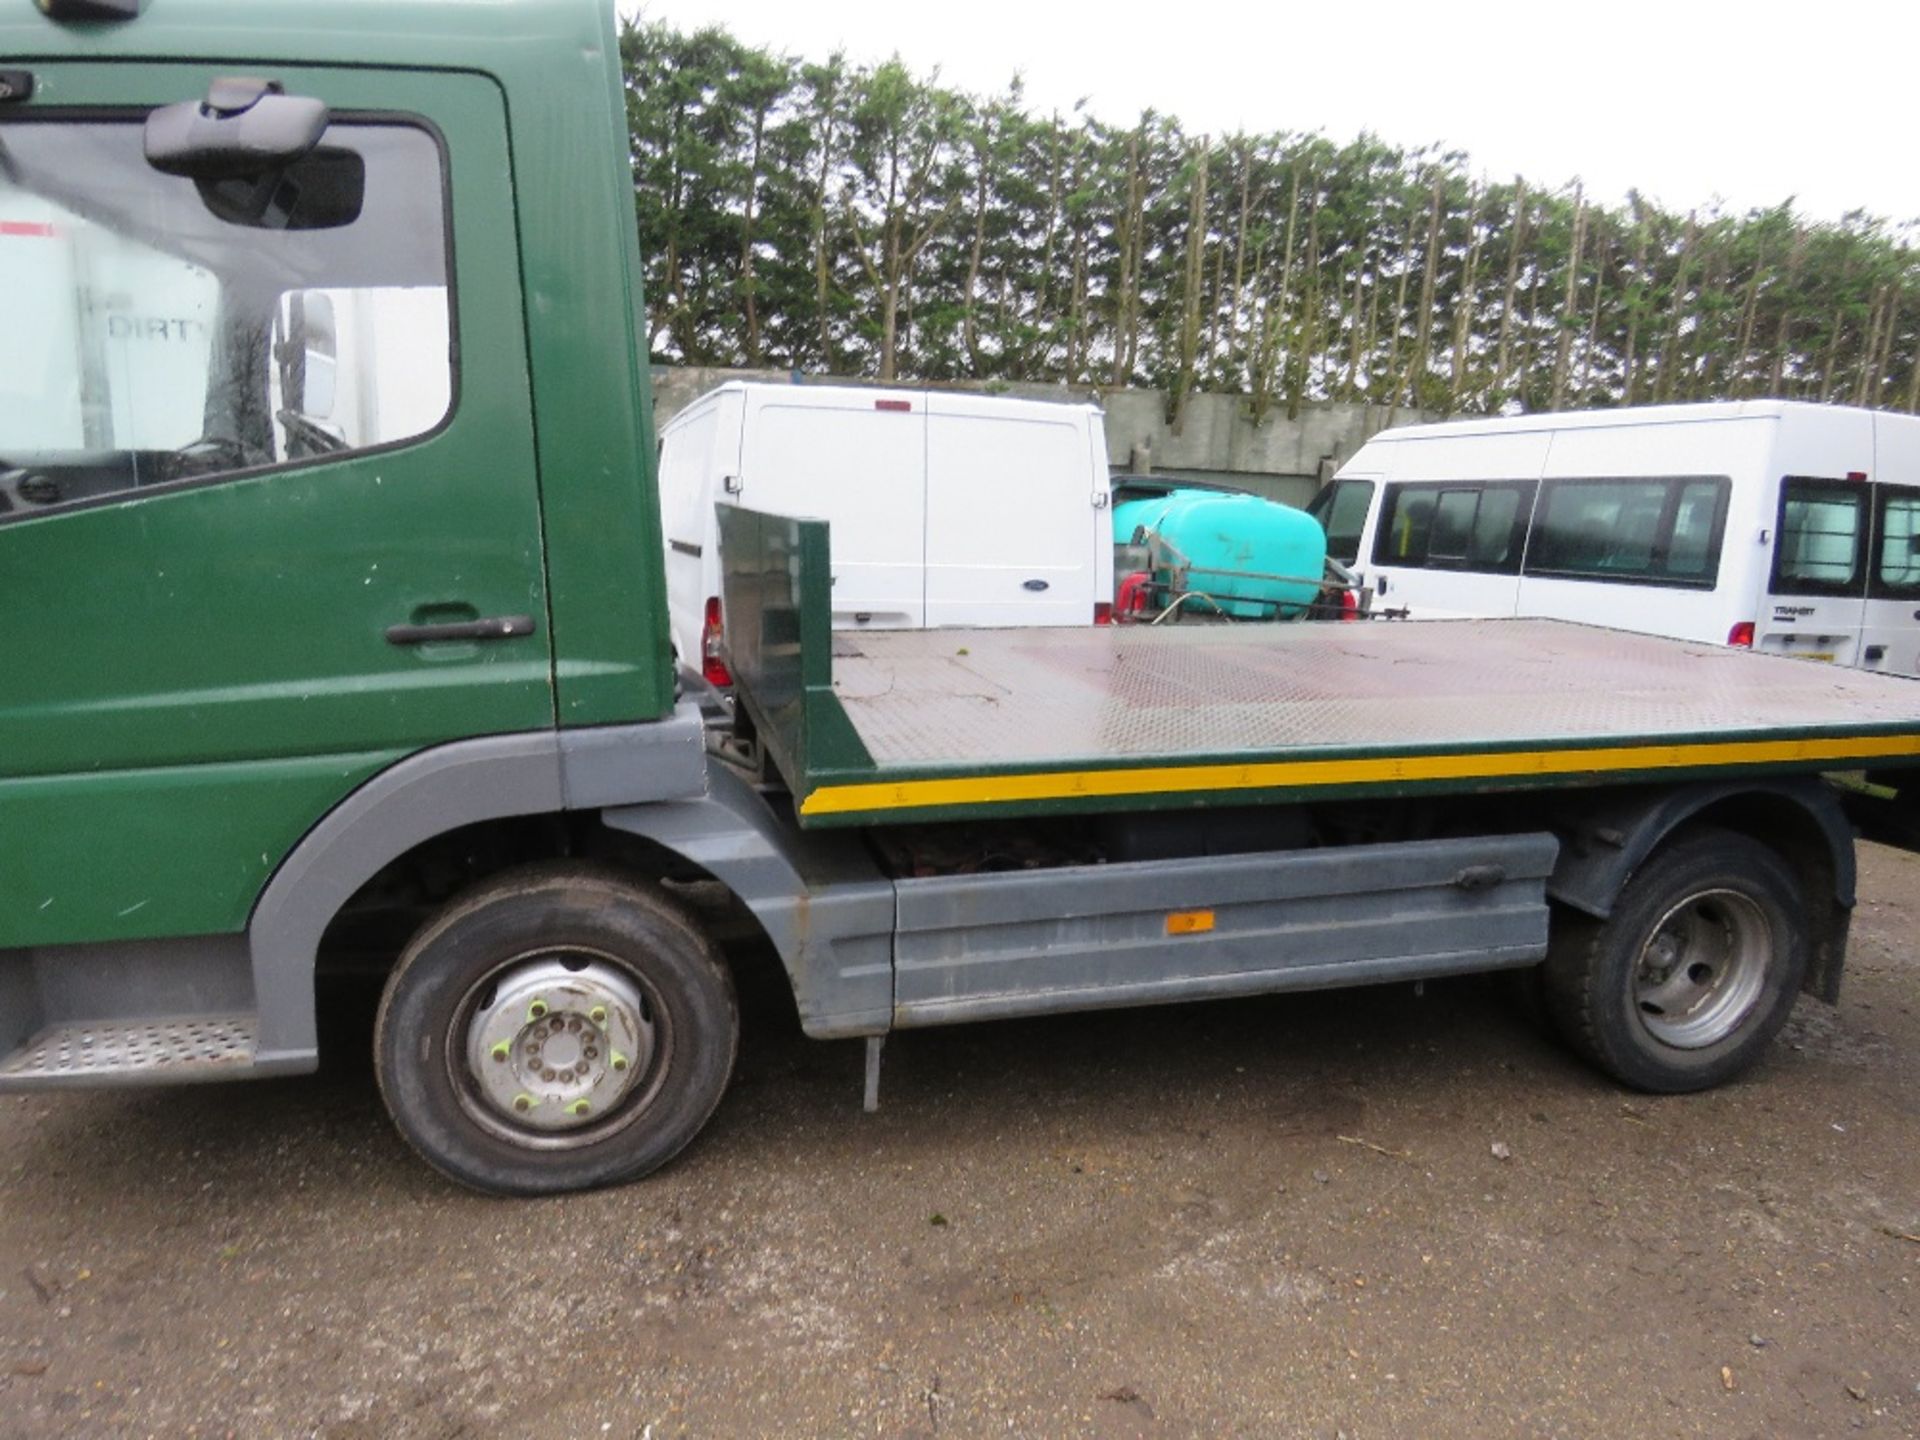 MERCEDES 7.5TONNE FLAT BED LORRY REG:GN55 NUP. MANUAL GEARBOX. STEEL CHEQUER PLATE BODY, 12FT LENGTH - Image 9 of 10